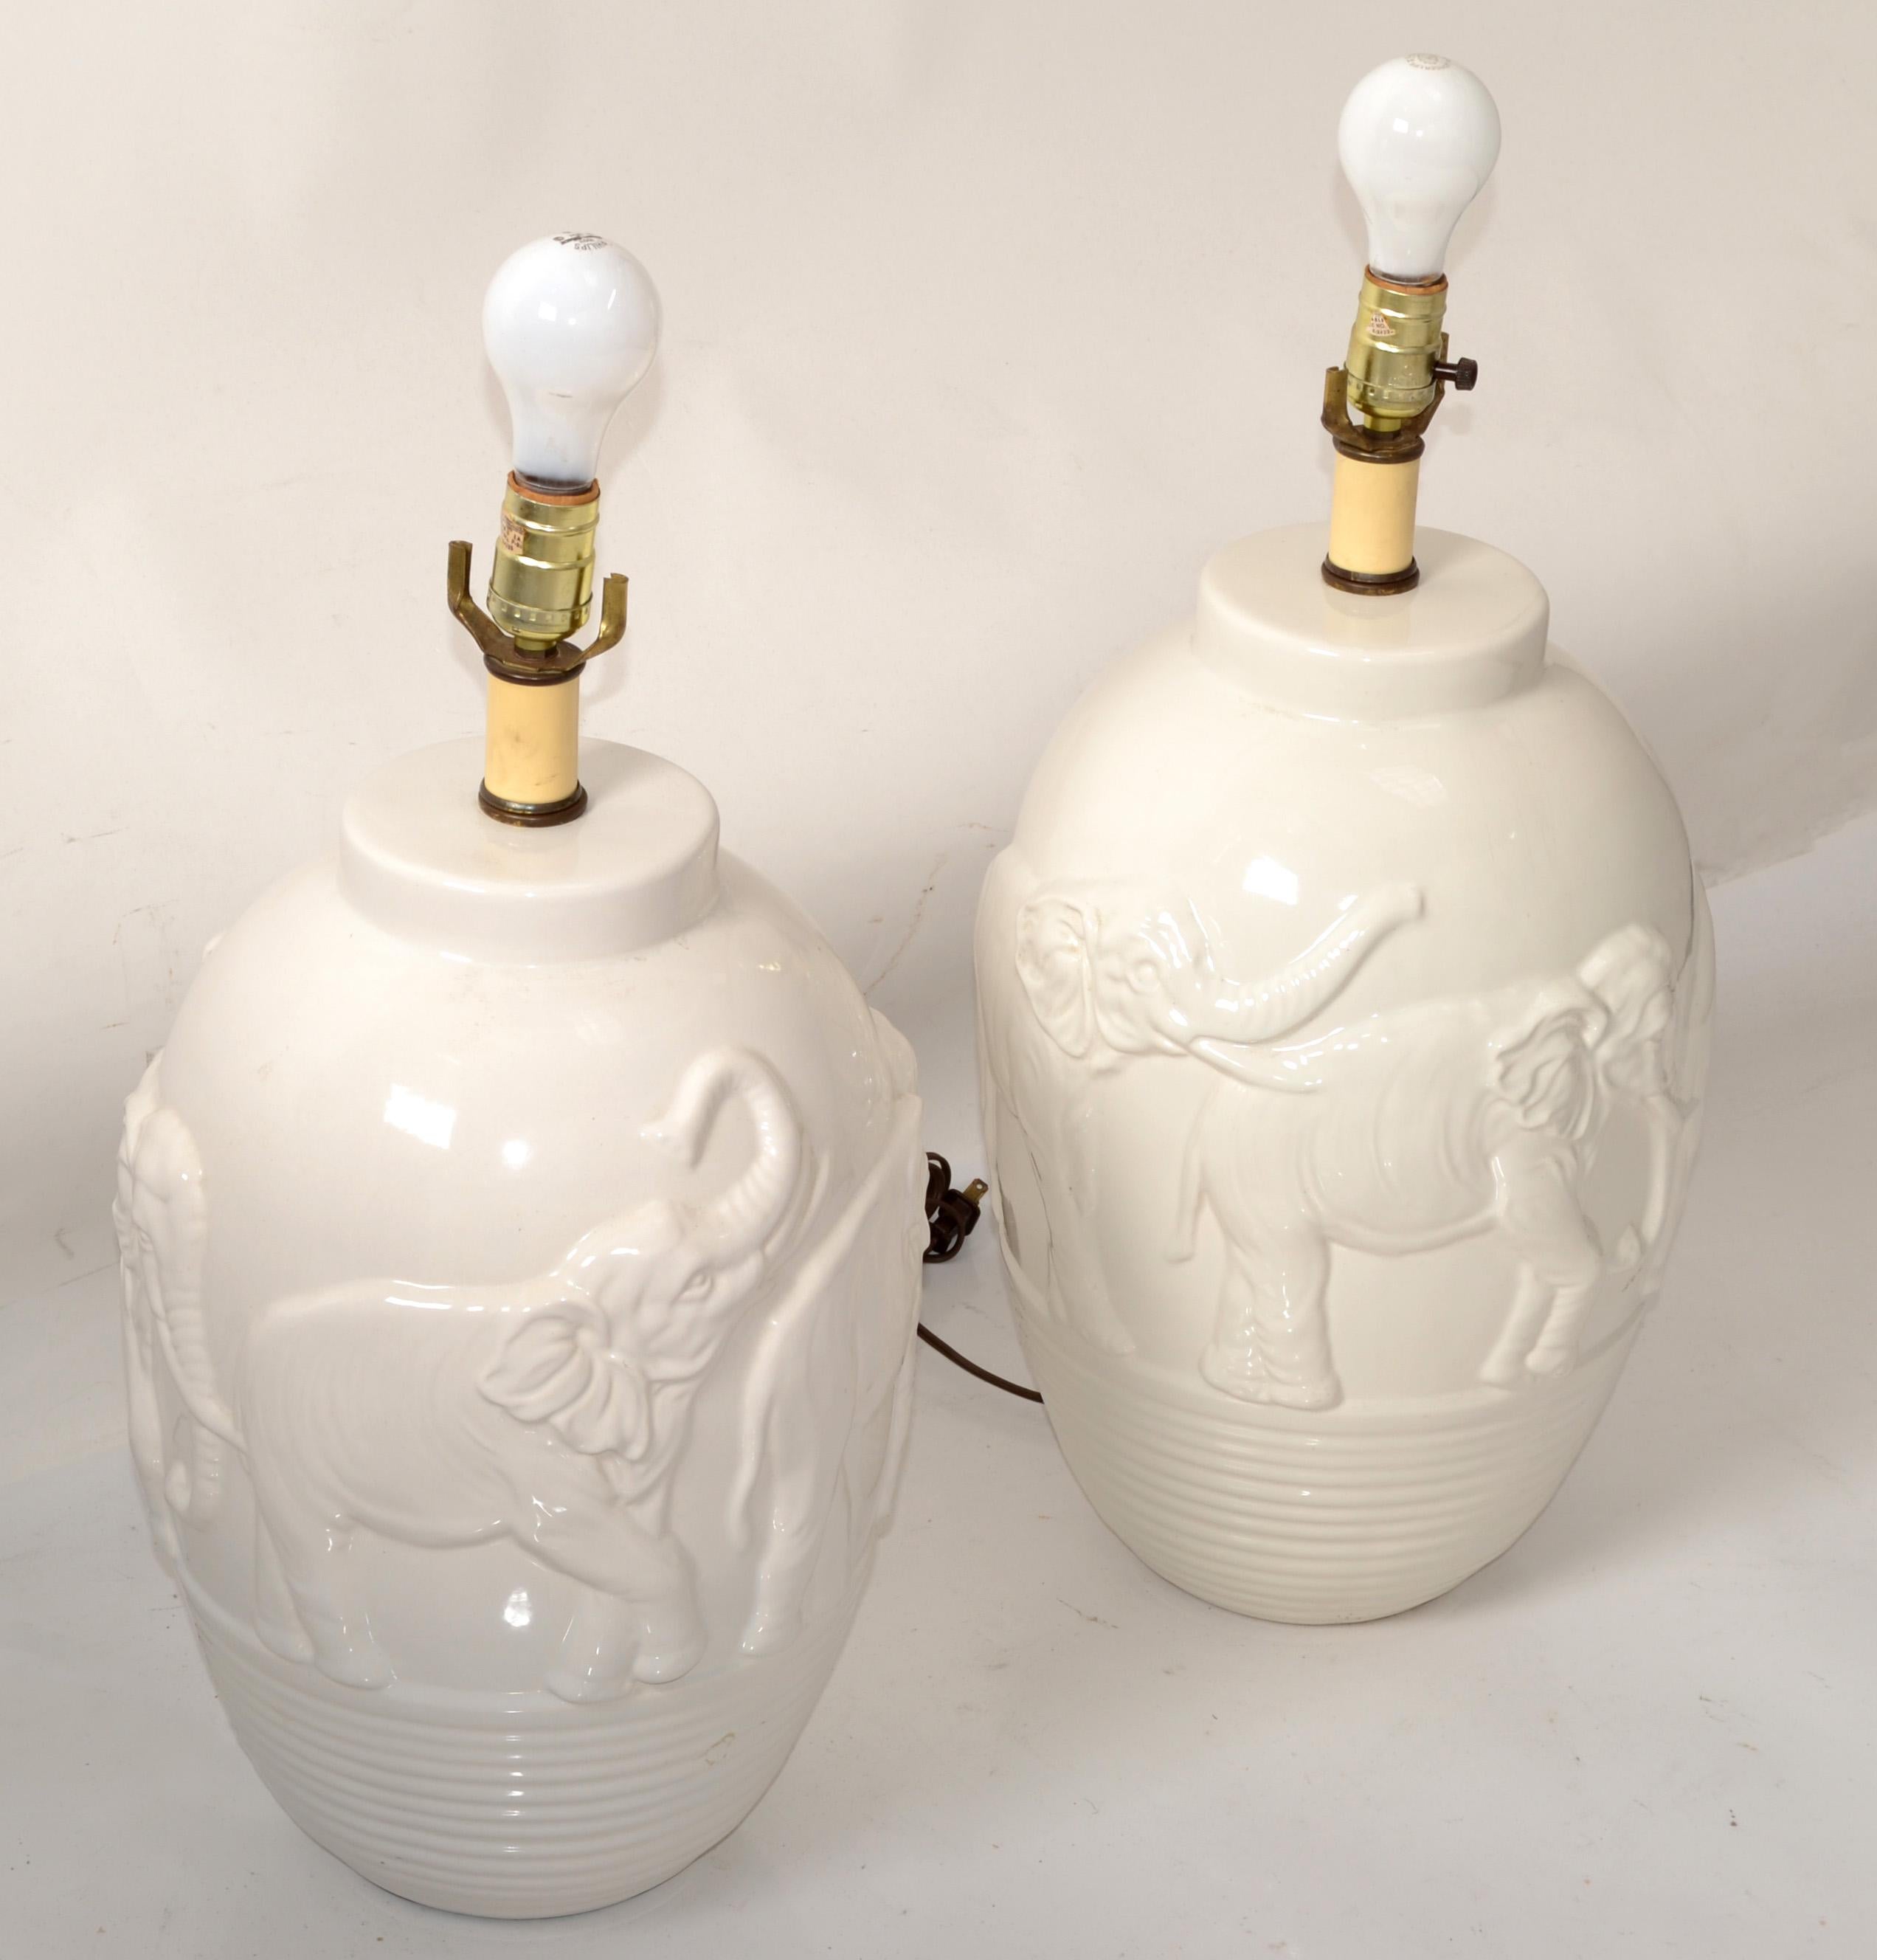 Asian Chinoiserie Style Pair of Off-White vintage glazed ceramic Table Lamps with Elephant 2D Motives and deeply incised base.
UL Listed, each Lamp takes a regular or LED Light bulb.
No Harp, Finial, Shade.
Great Lamps for the Master Bedroom, on Top